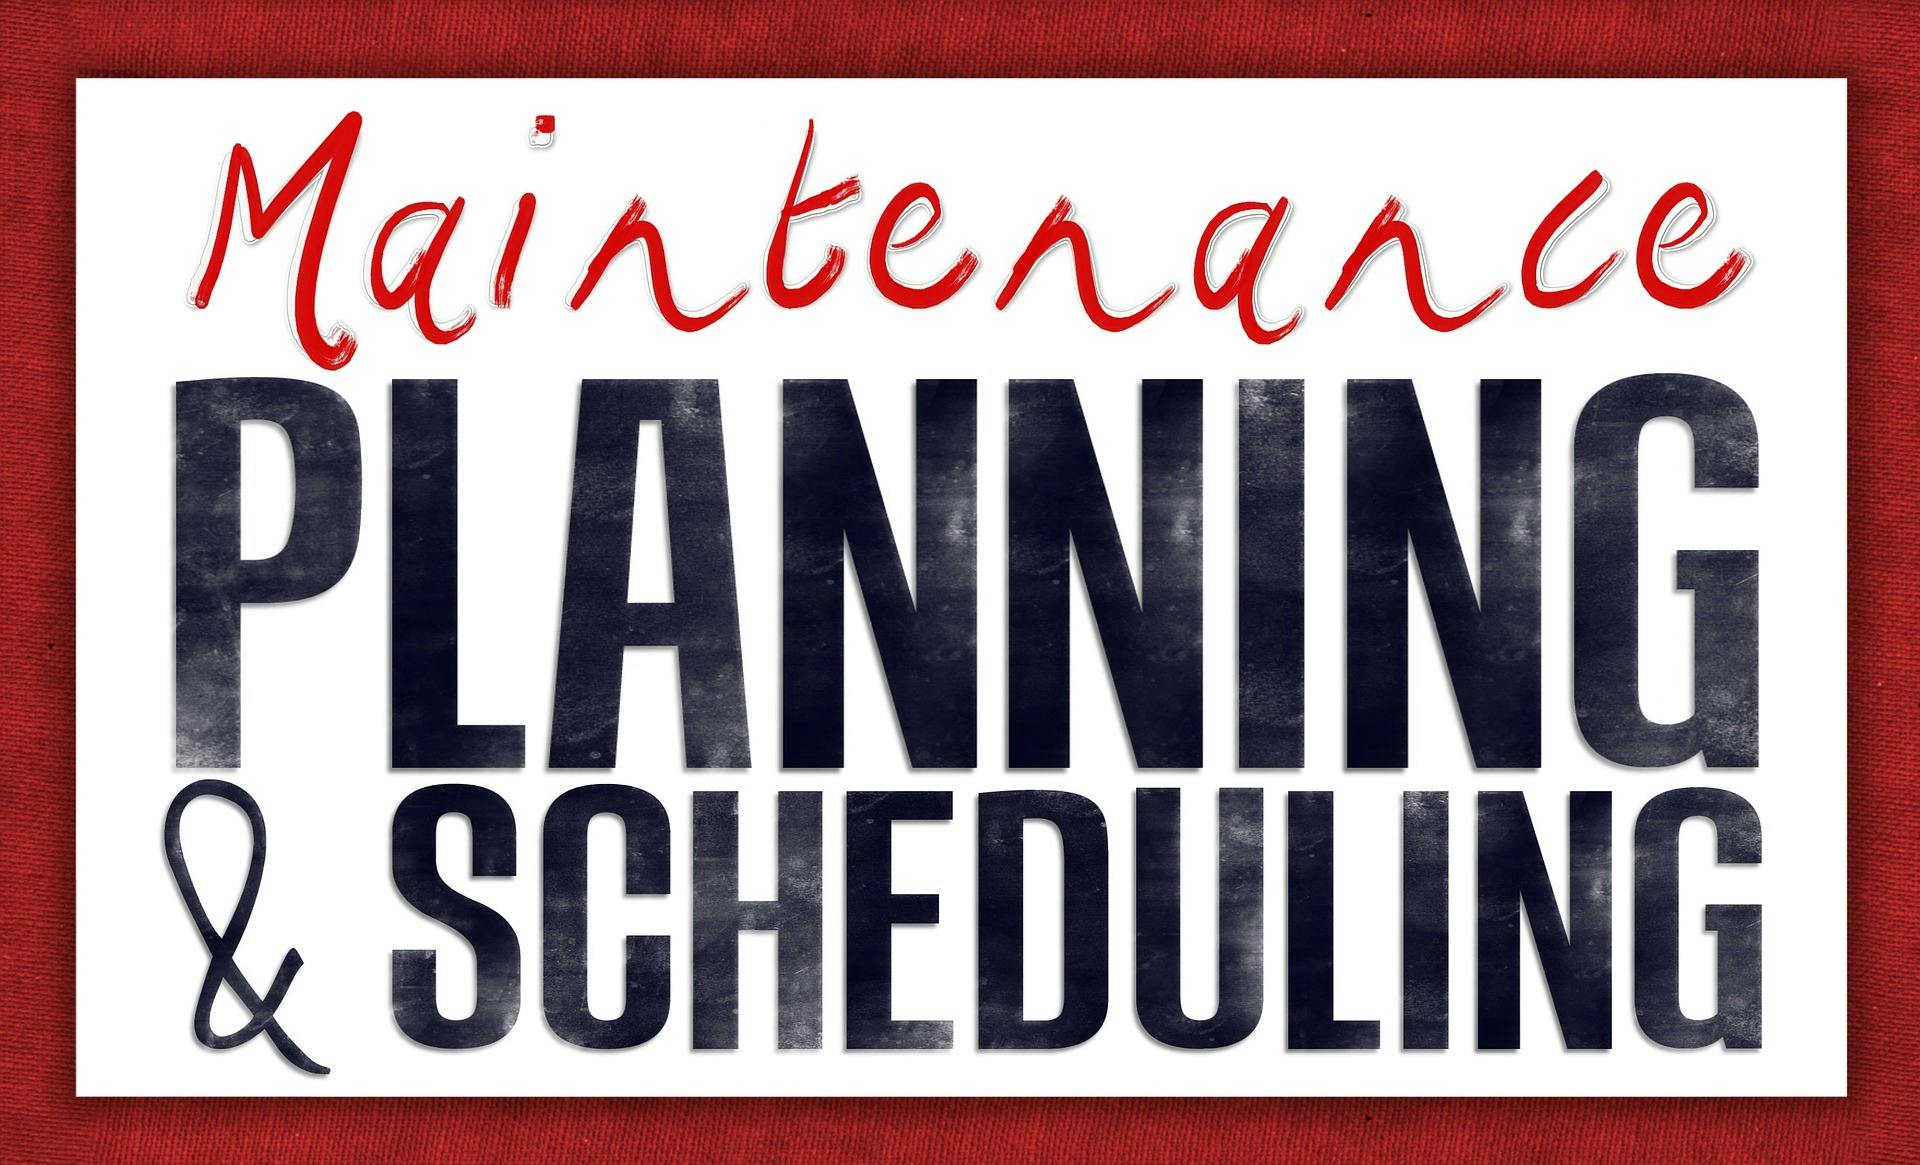 scheduling maintenance for manufacturing equipment